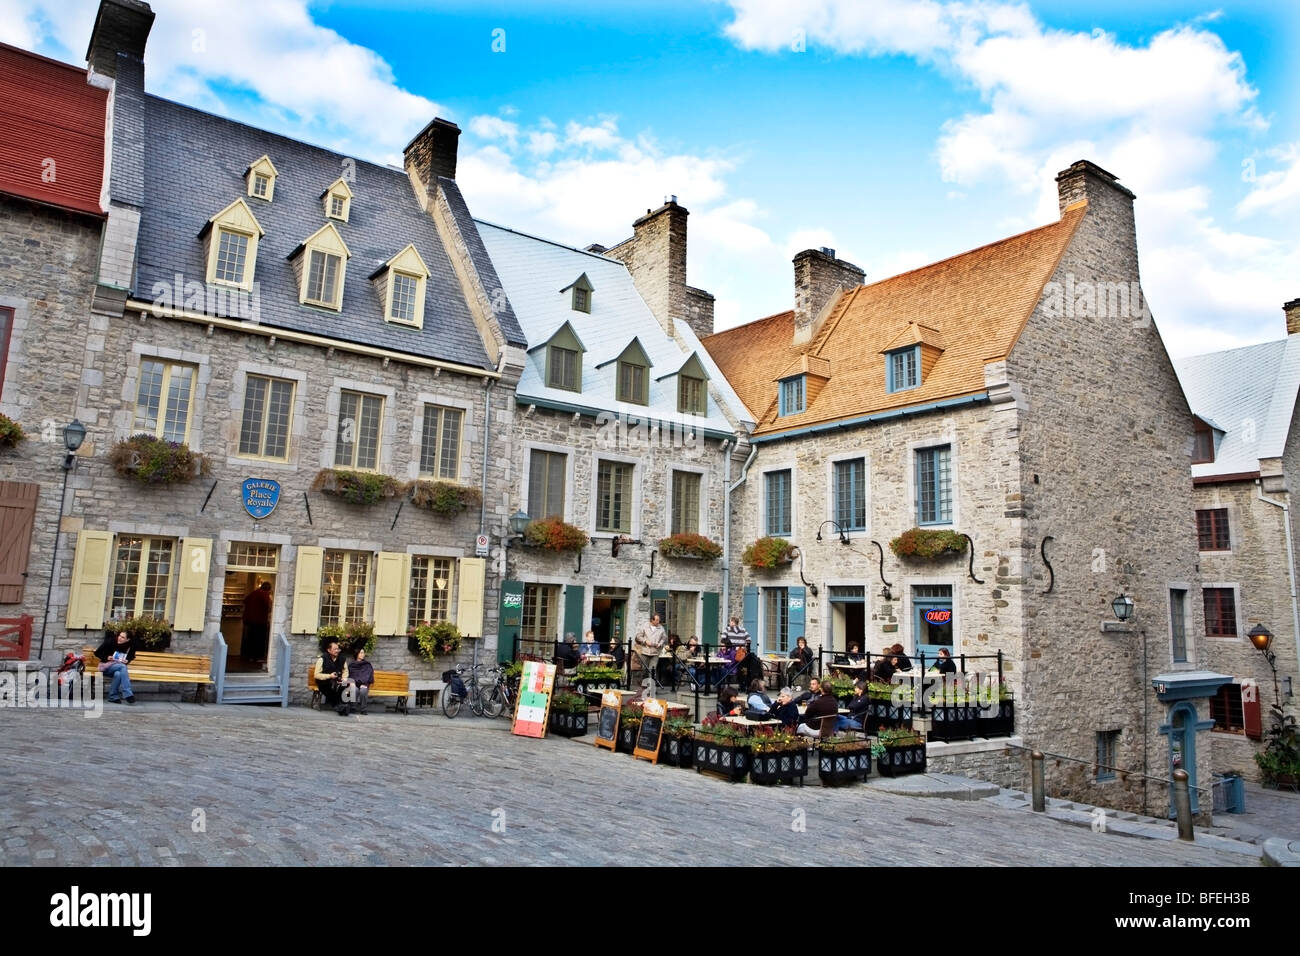 Place Royale in historic Old Quebec where Samuel de Champlain founded Quebec in 1608, Quebec City, Quebec, Canada Stock Photo